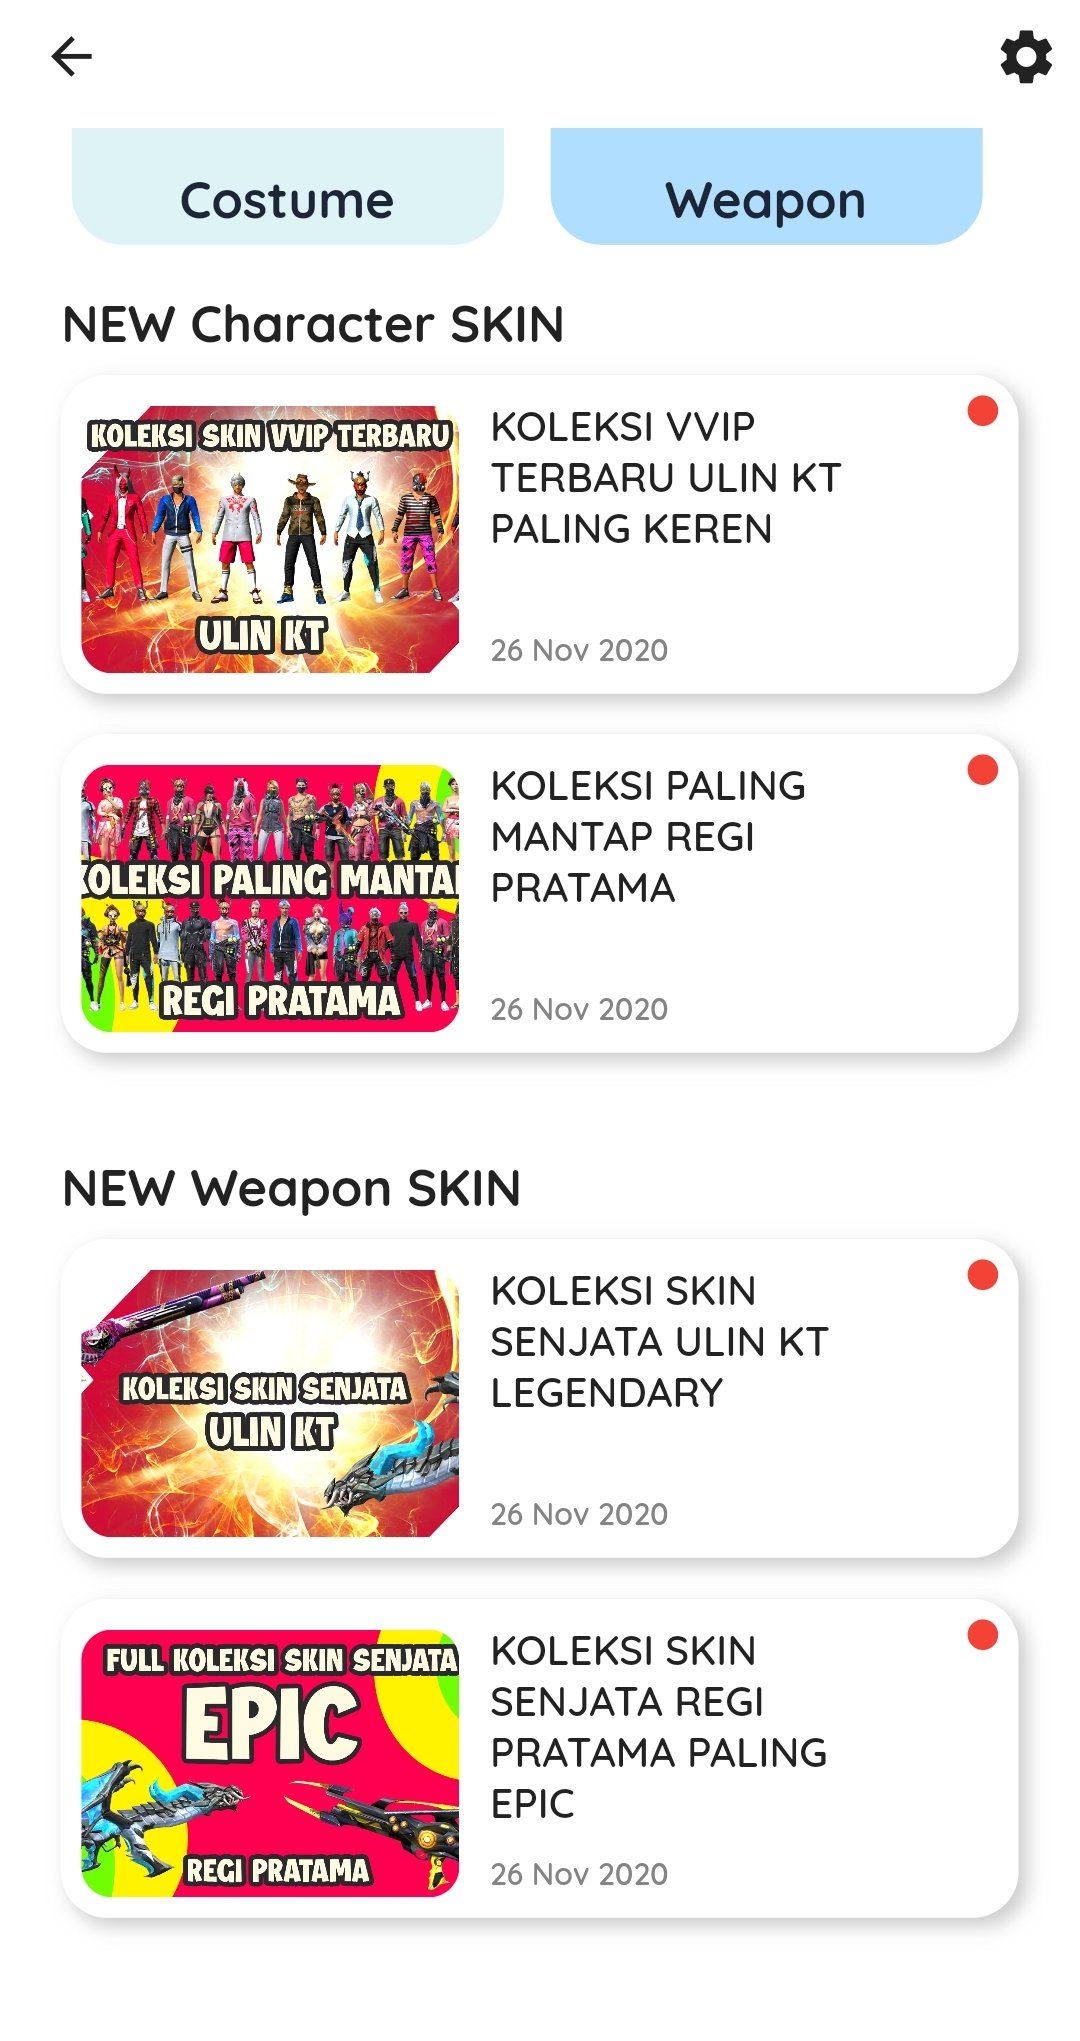 Tool Skin / Tool Skin Ff Free Fire Pro Mod Apk Versi Terbaru 2021 / Sg tool skin apk has accepted more than 100 types of devices for play and use, created main features, more shadow features, mod feature, advanced features etc is that has available with great structure, customization by the developers.